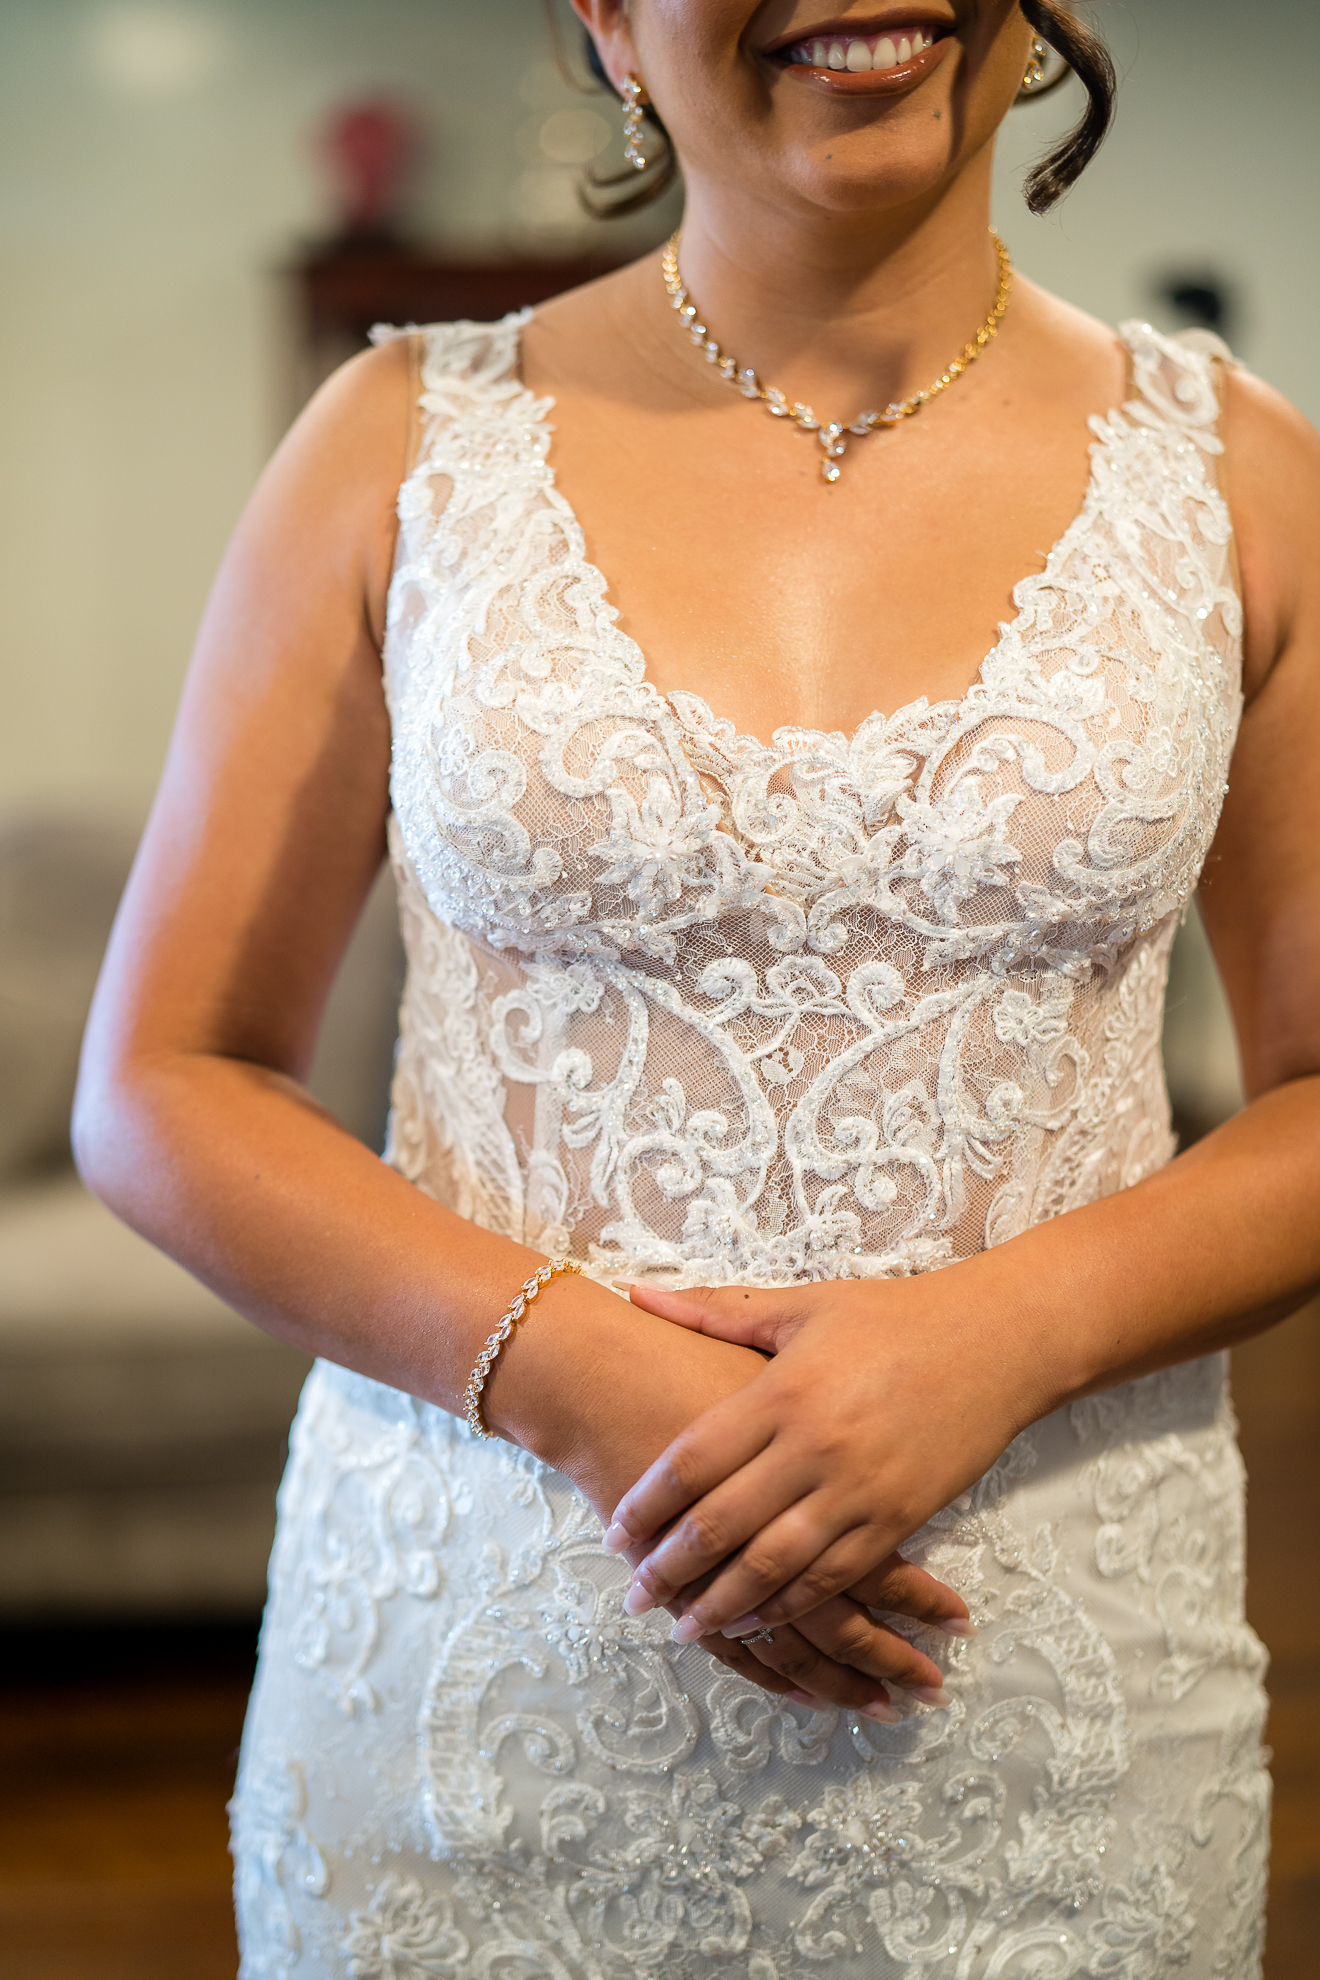 ThomasKim_photography A bride in a lace wedding dress smiles for the camera. (S)